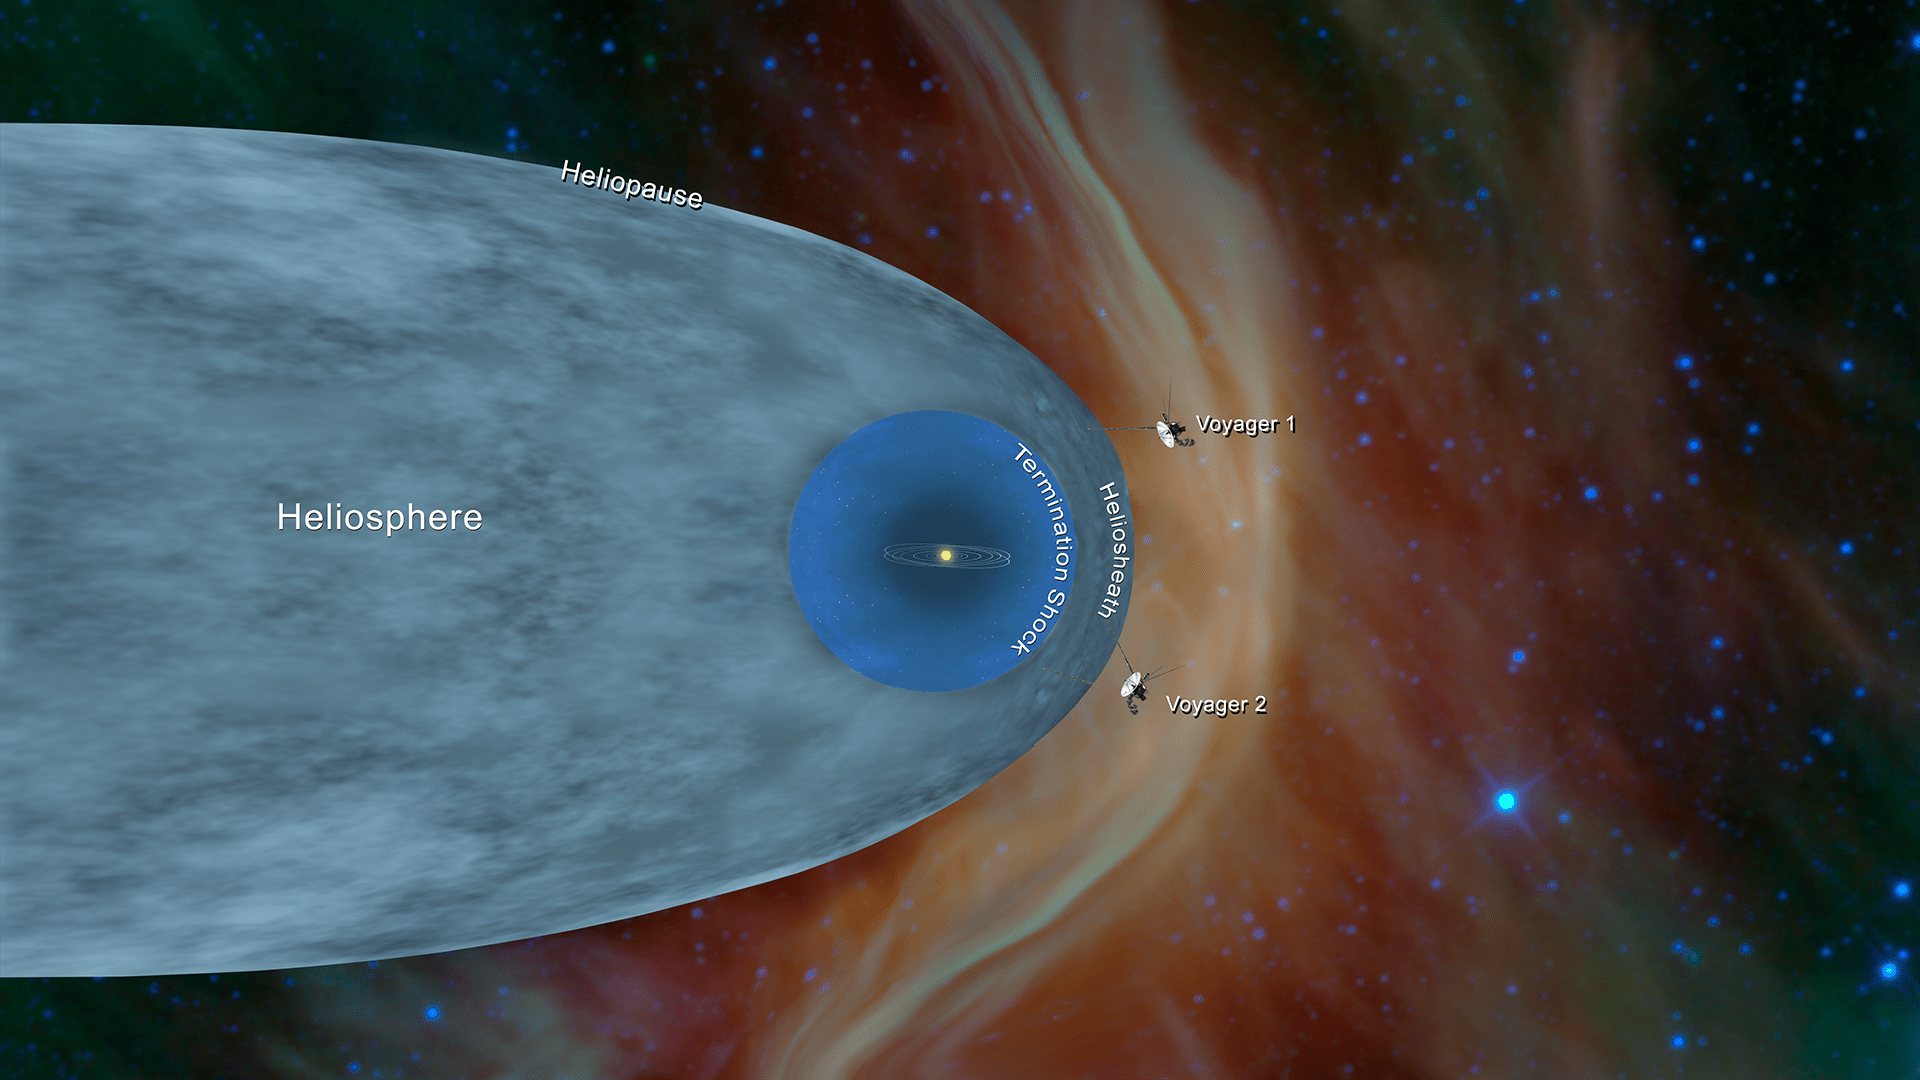 A graphic shows the twin Voyagers beyond the Heliosheath, Heliopause, termination shock and heliosheath.